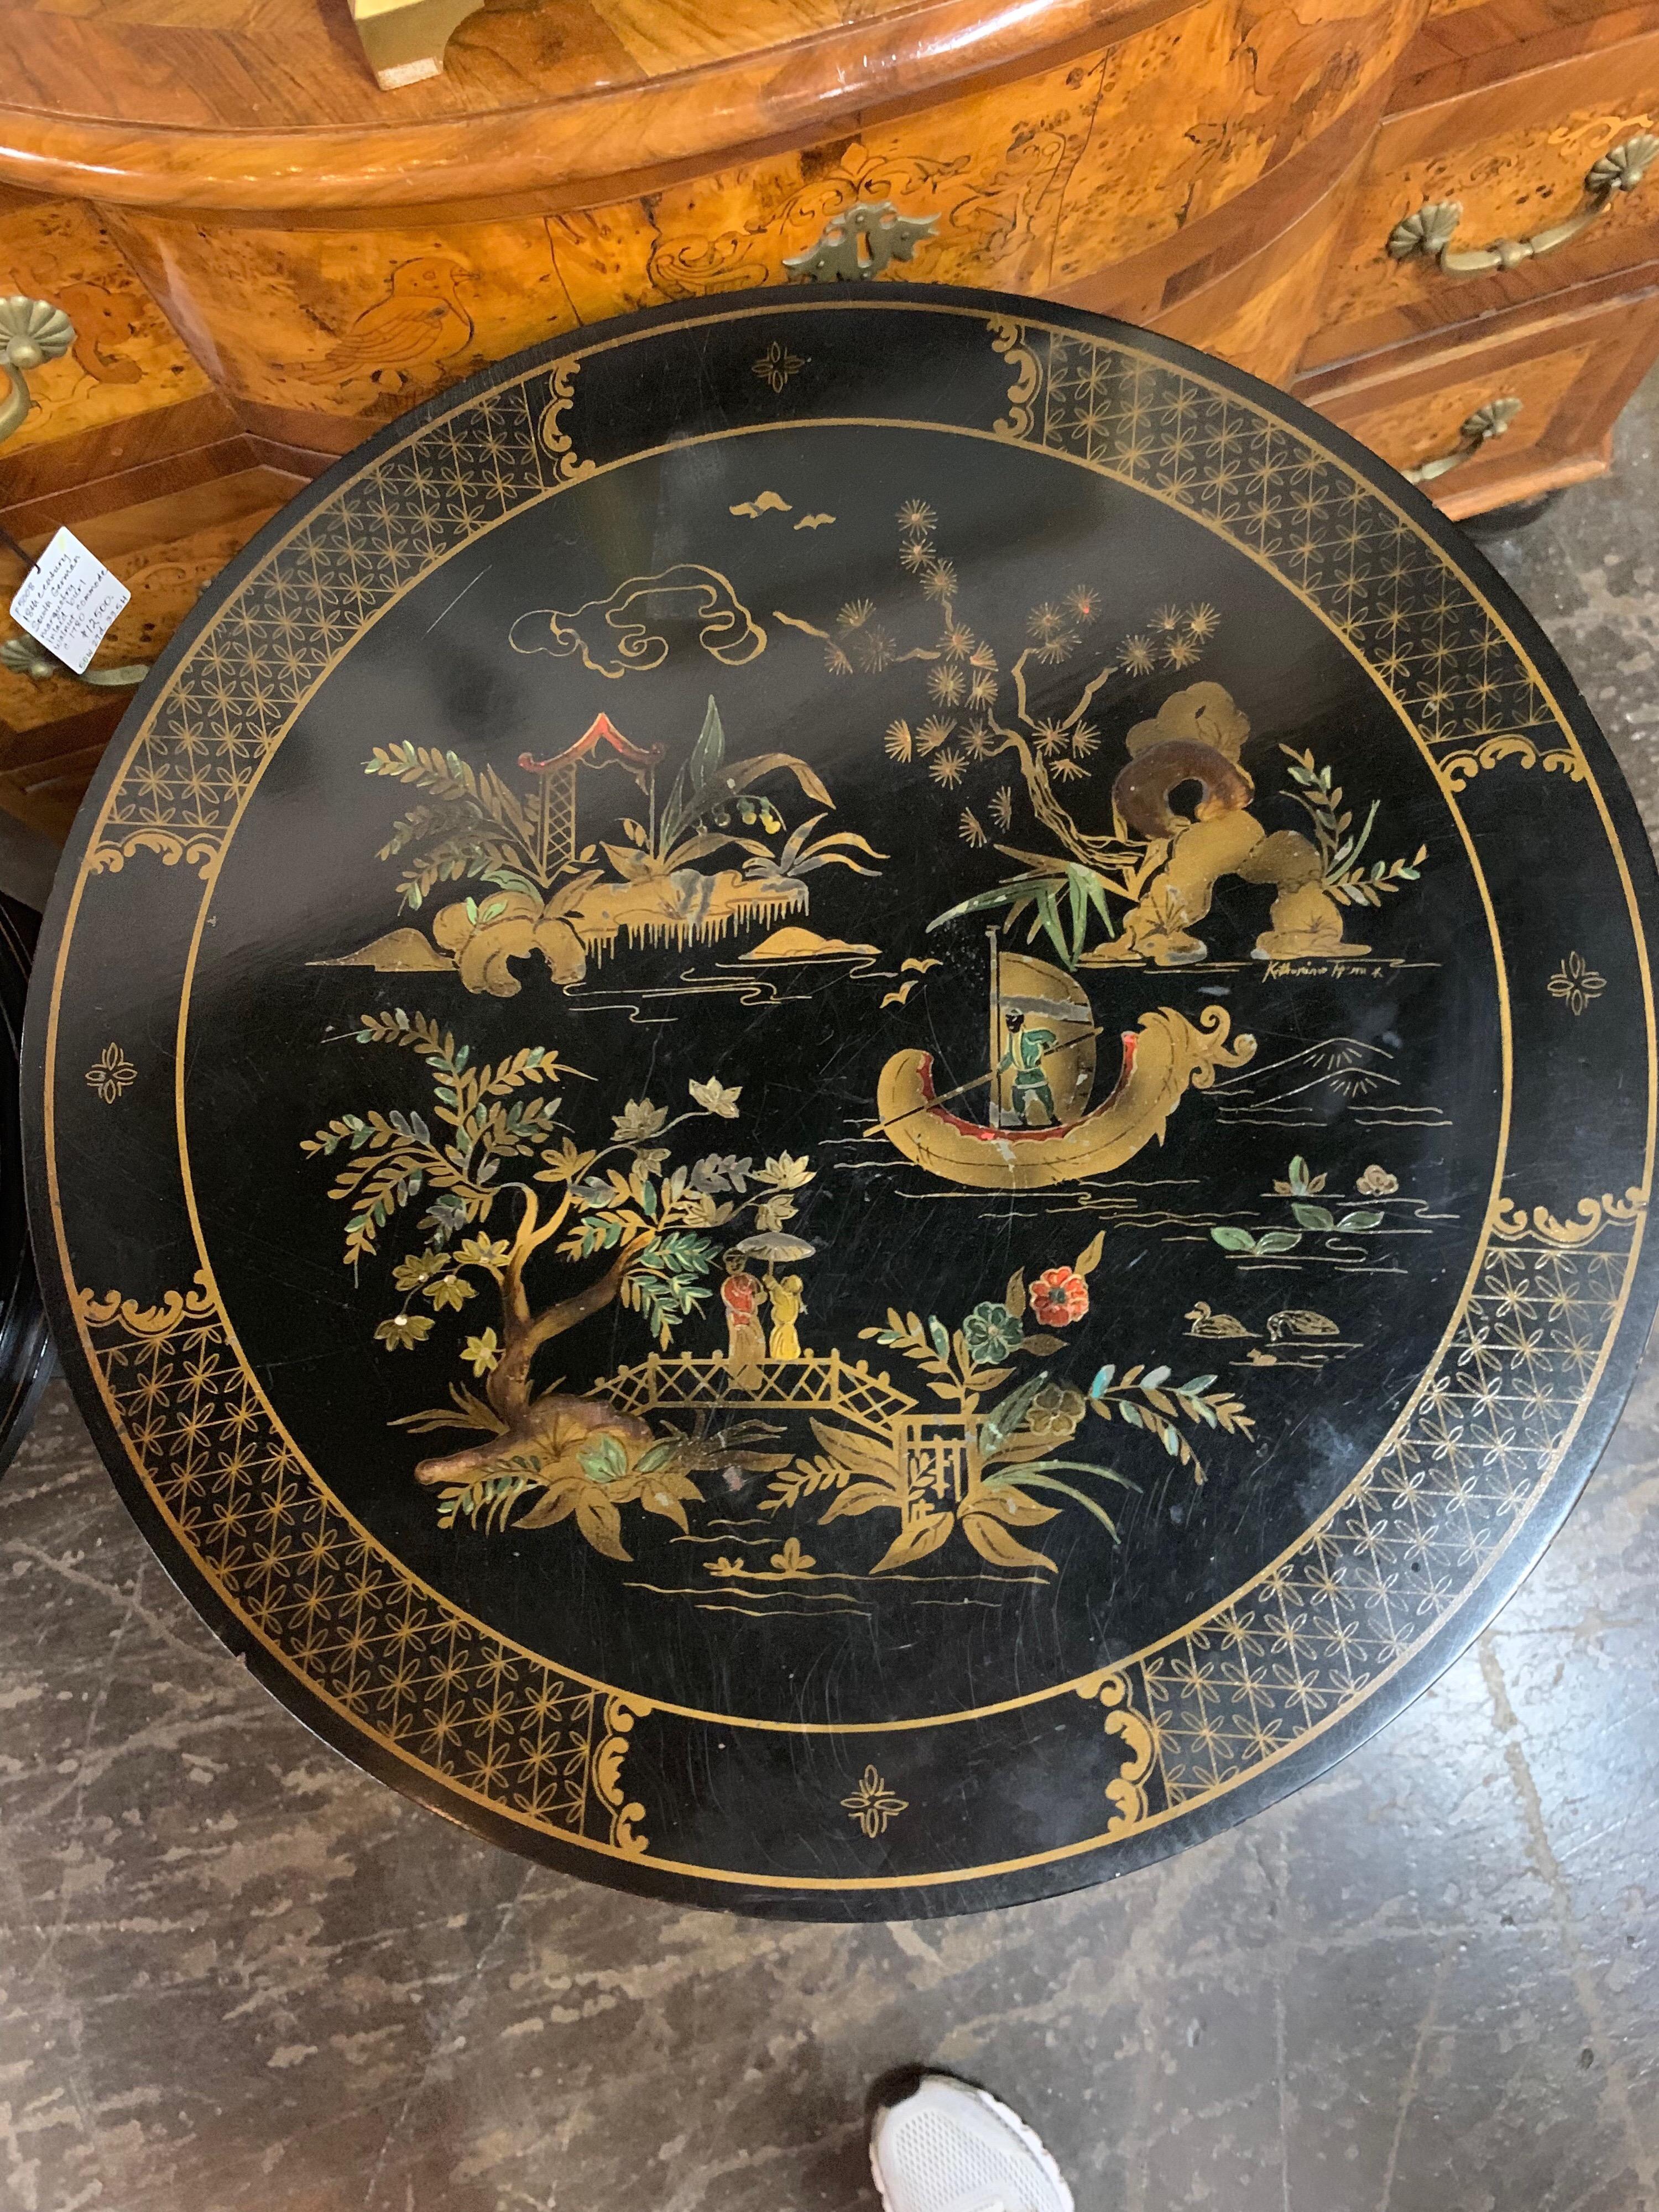 Beautiful pair of black lacquered side tables with interesting hand painted Chinoiserie designs on the top and second tier of the table. The sides of the table are made of wire mesh. Great conversation pieces!